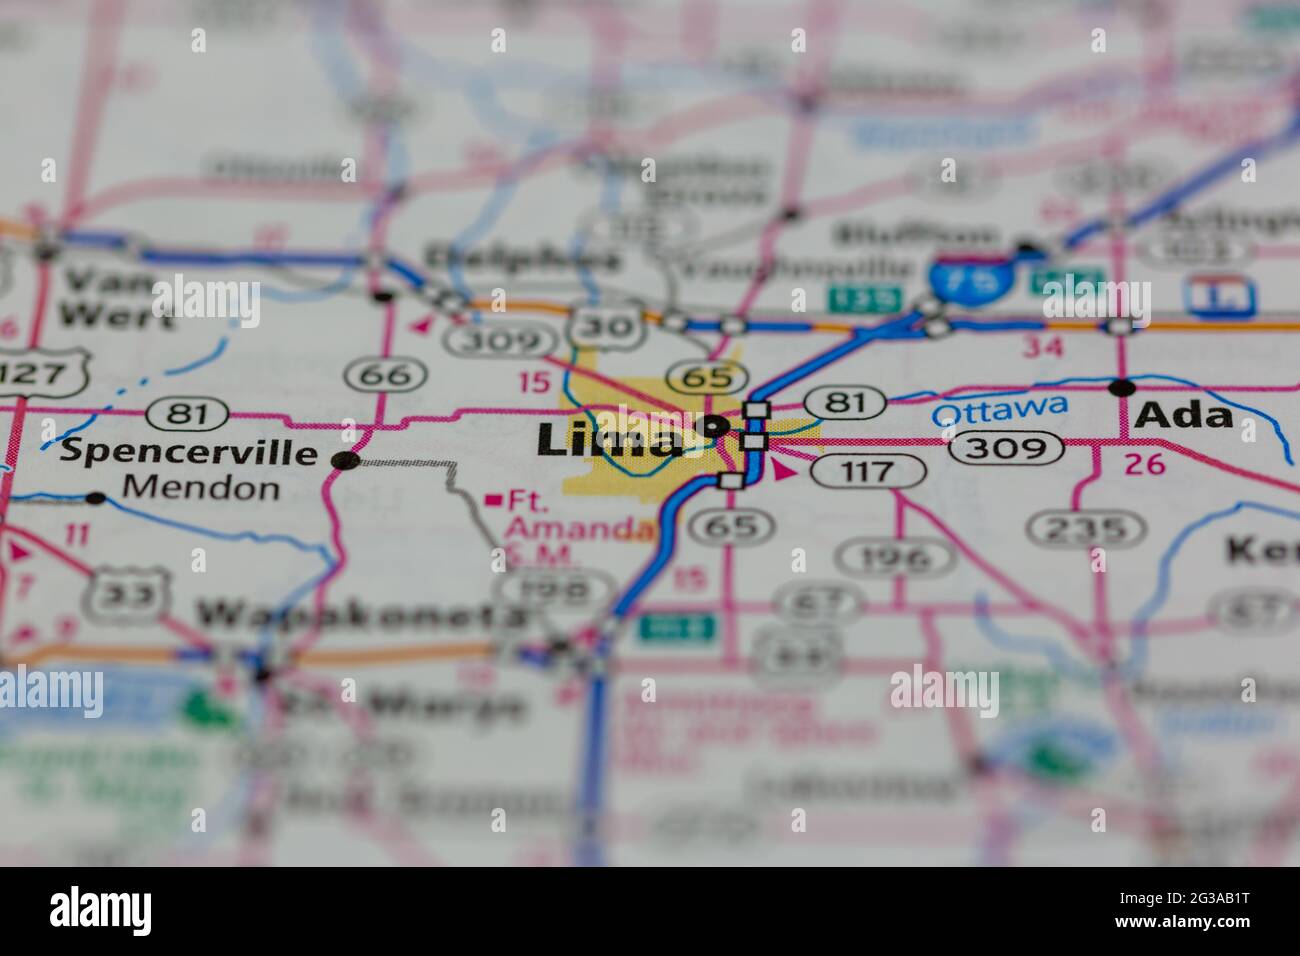 Lima Ohio Usa Shown On A Geography Map Or Road Map 2G3AB1T 